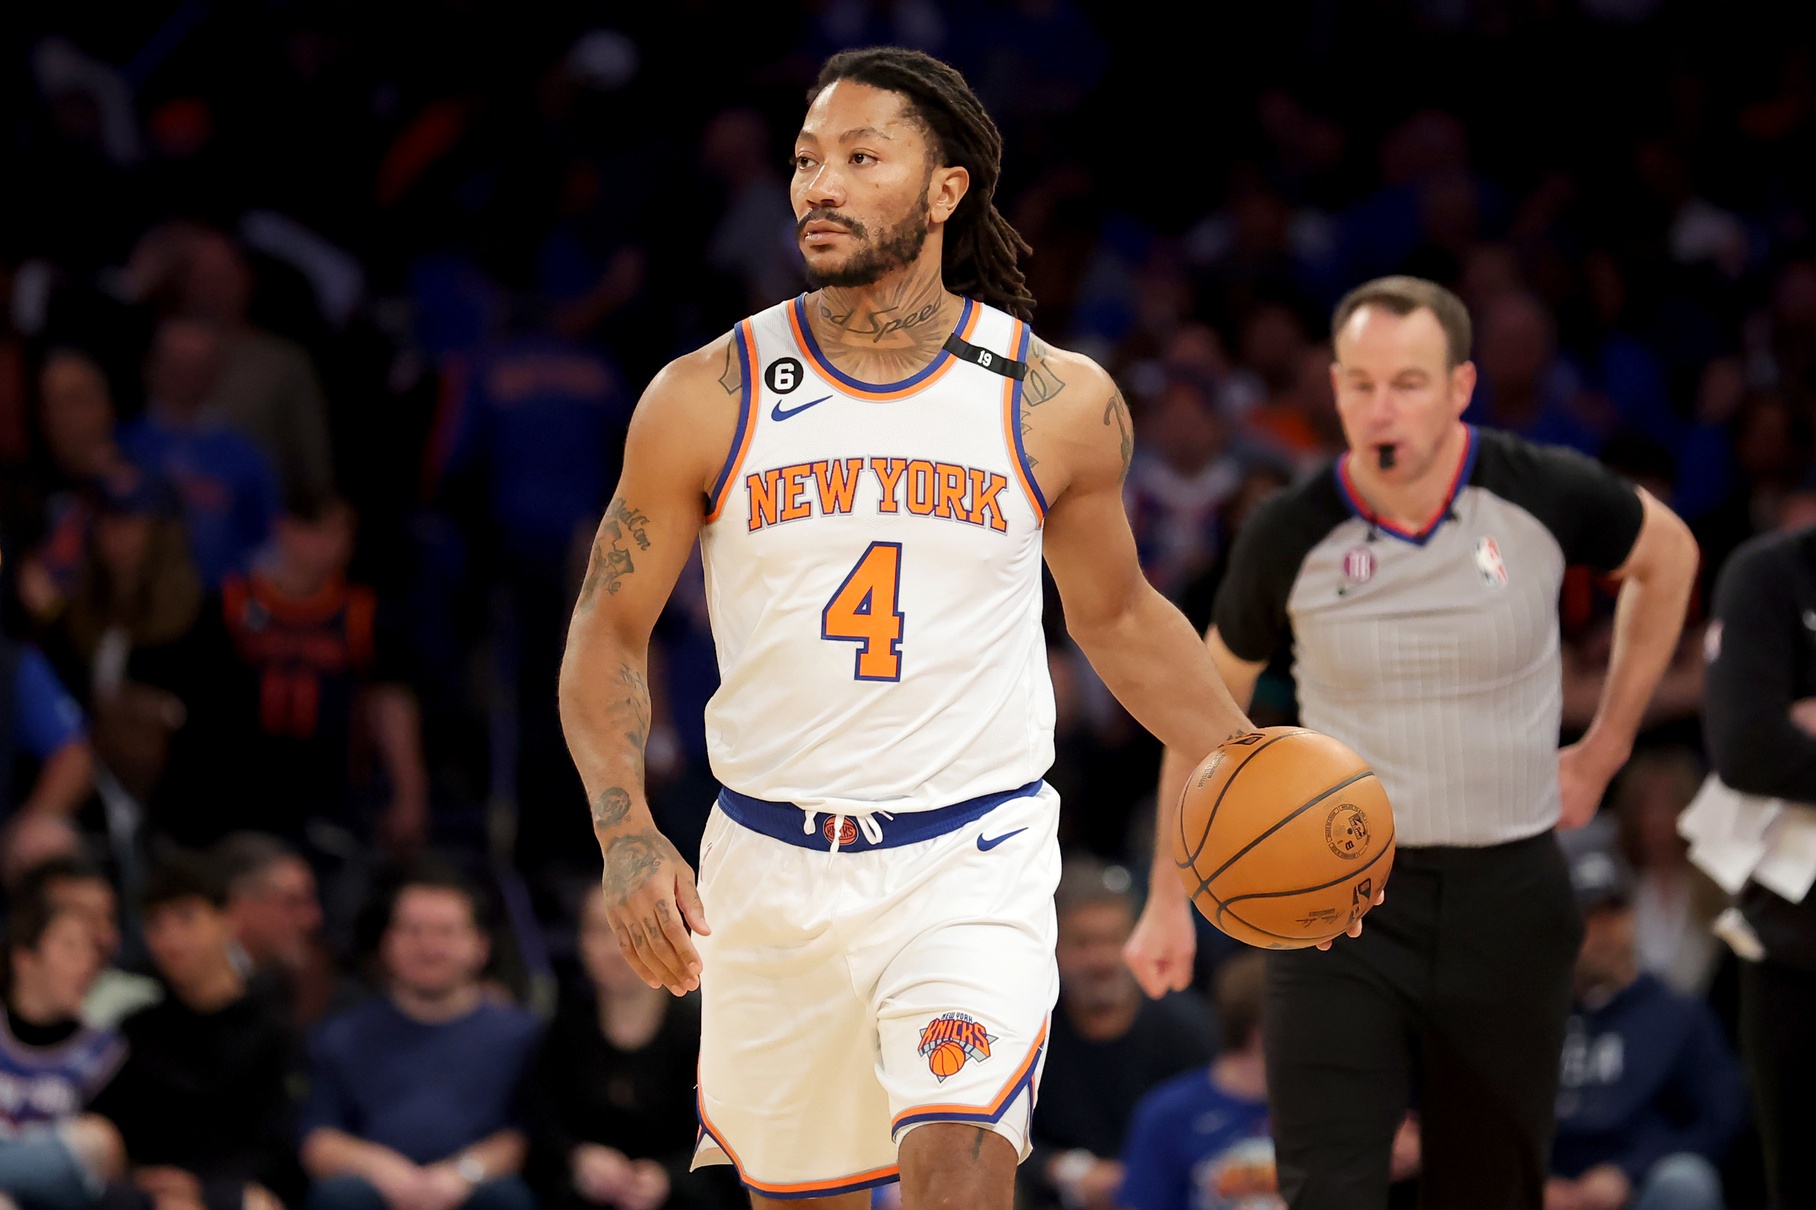 Derrick Rose heads to NBA Free Agency after Knicks option is not picked up